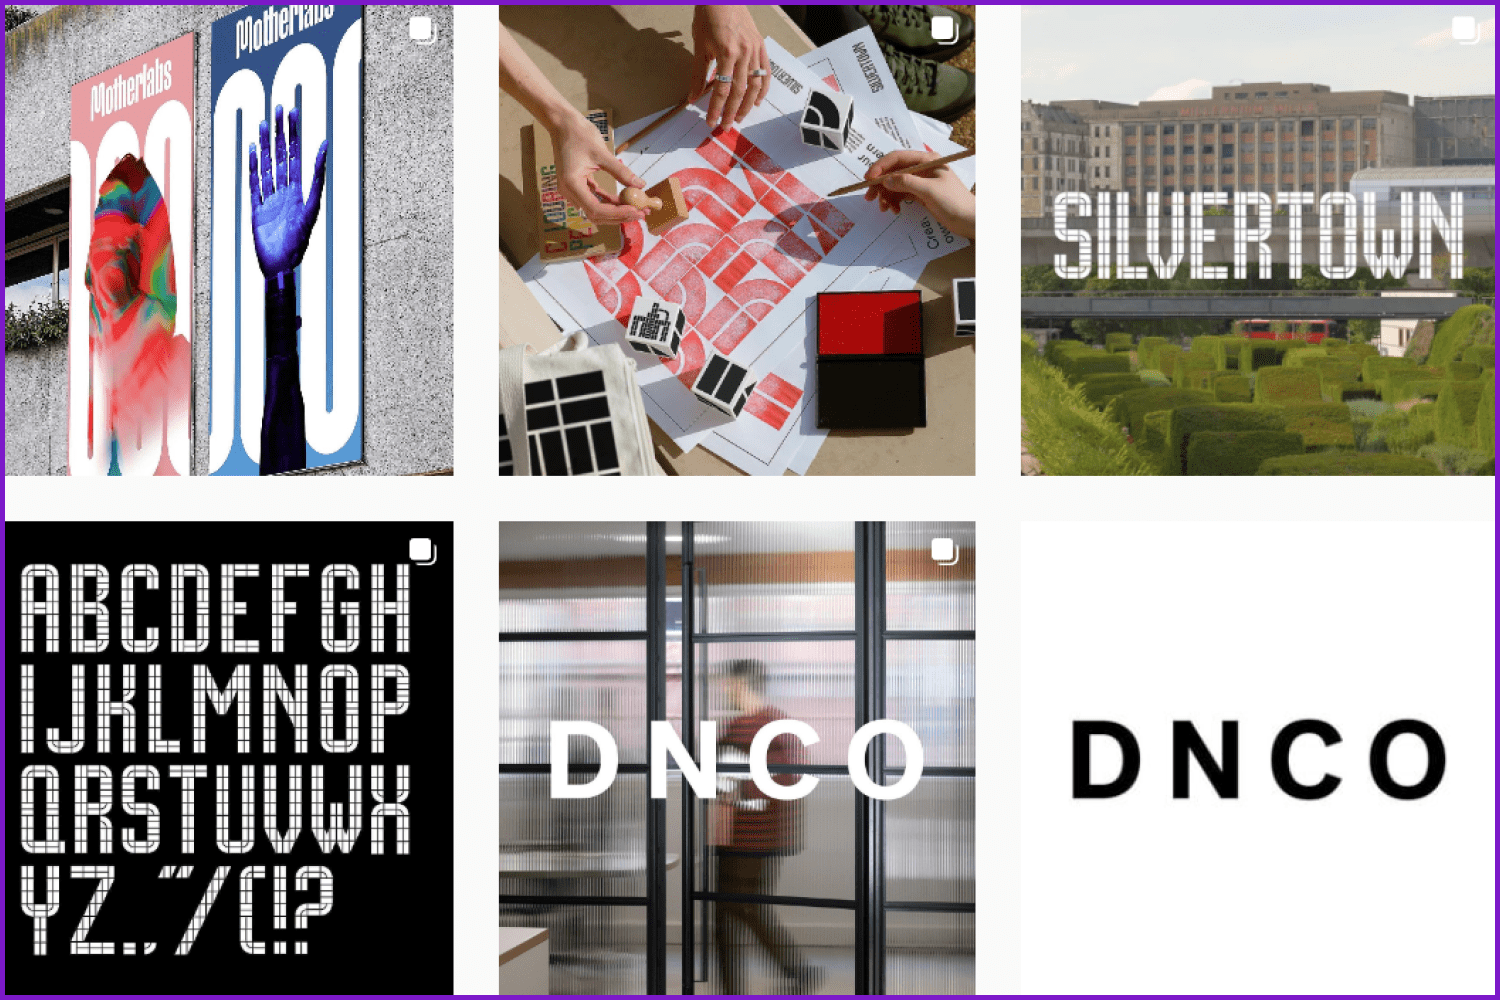 Collage of Instagram account images @dnco.